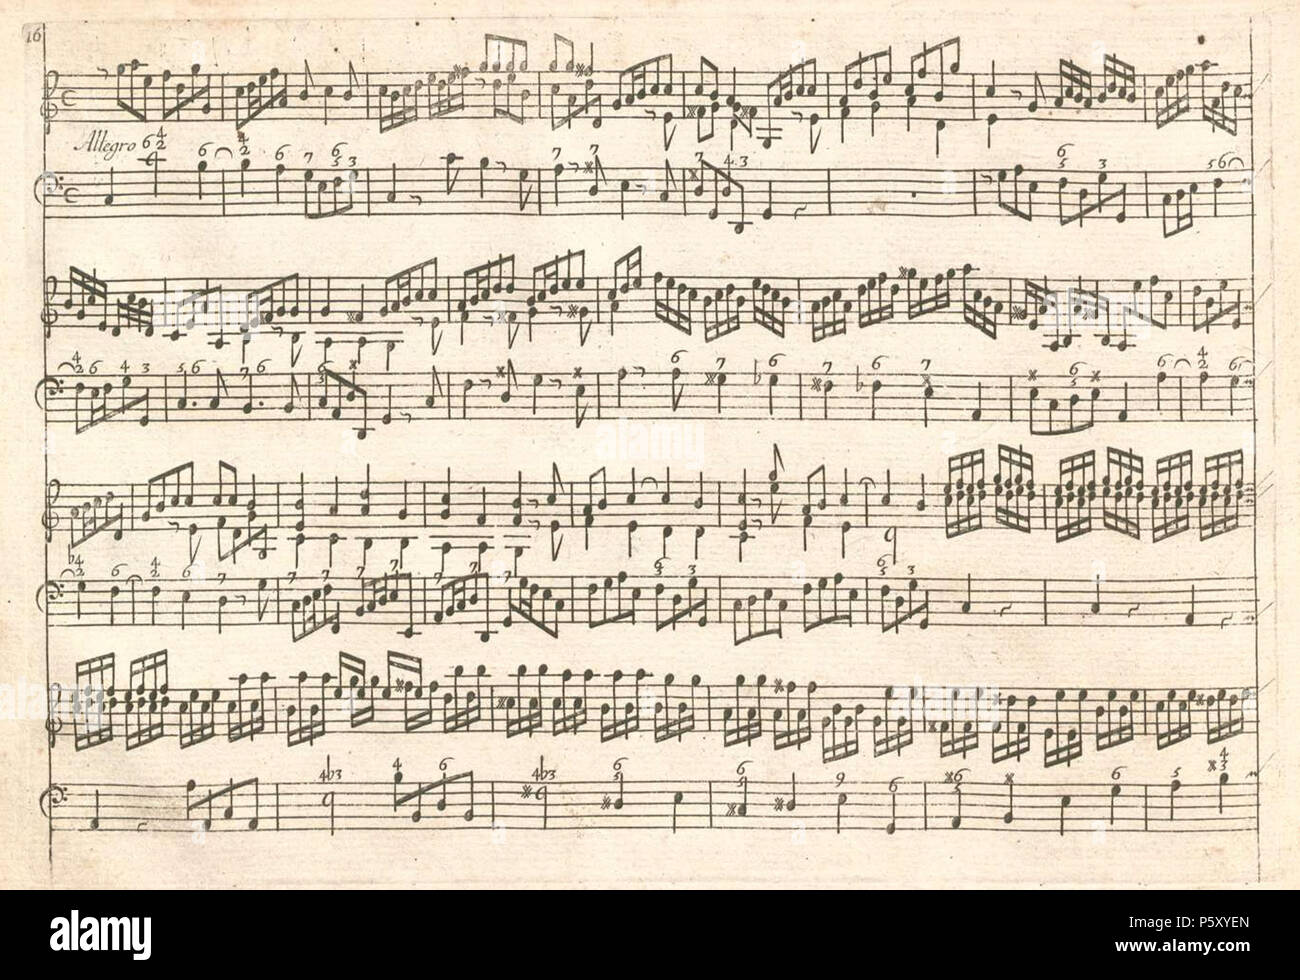 N/A. Allegro from first edition of Sonata Op.5 No.3 by Arcangelo Corelli, published by Gasparo Pietra Santa . circa 1700. w:Arcangelo Corelli 379 Corelli Sonata Op.5 No.3 Allegro Stock Photo